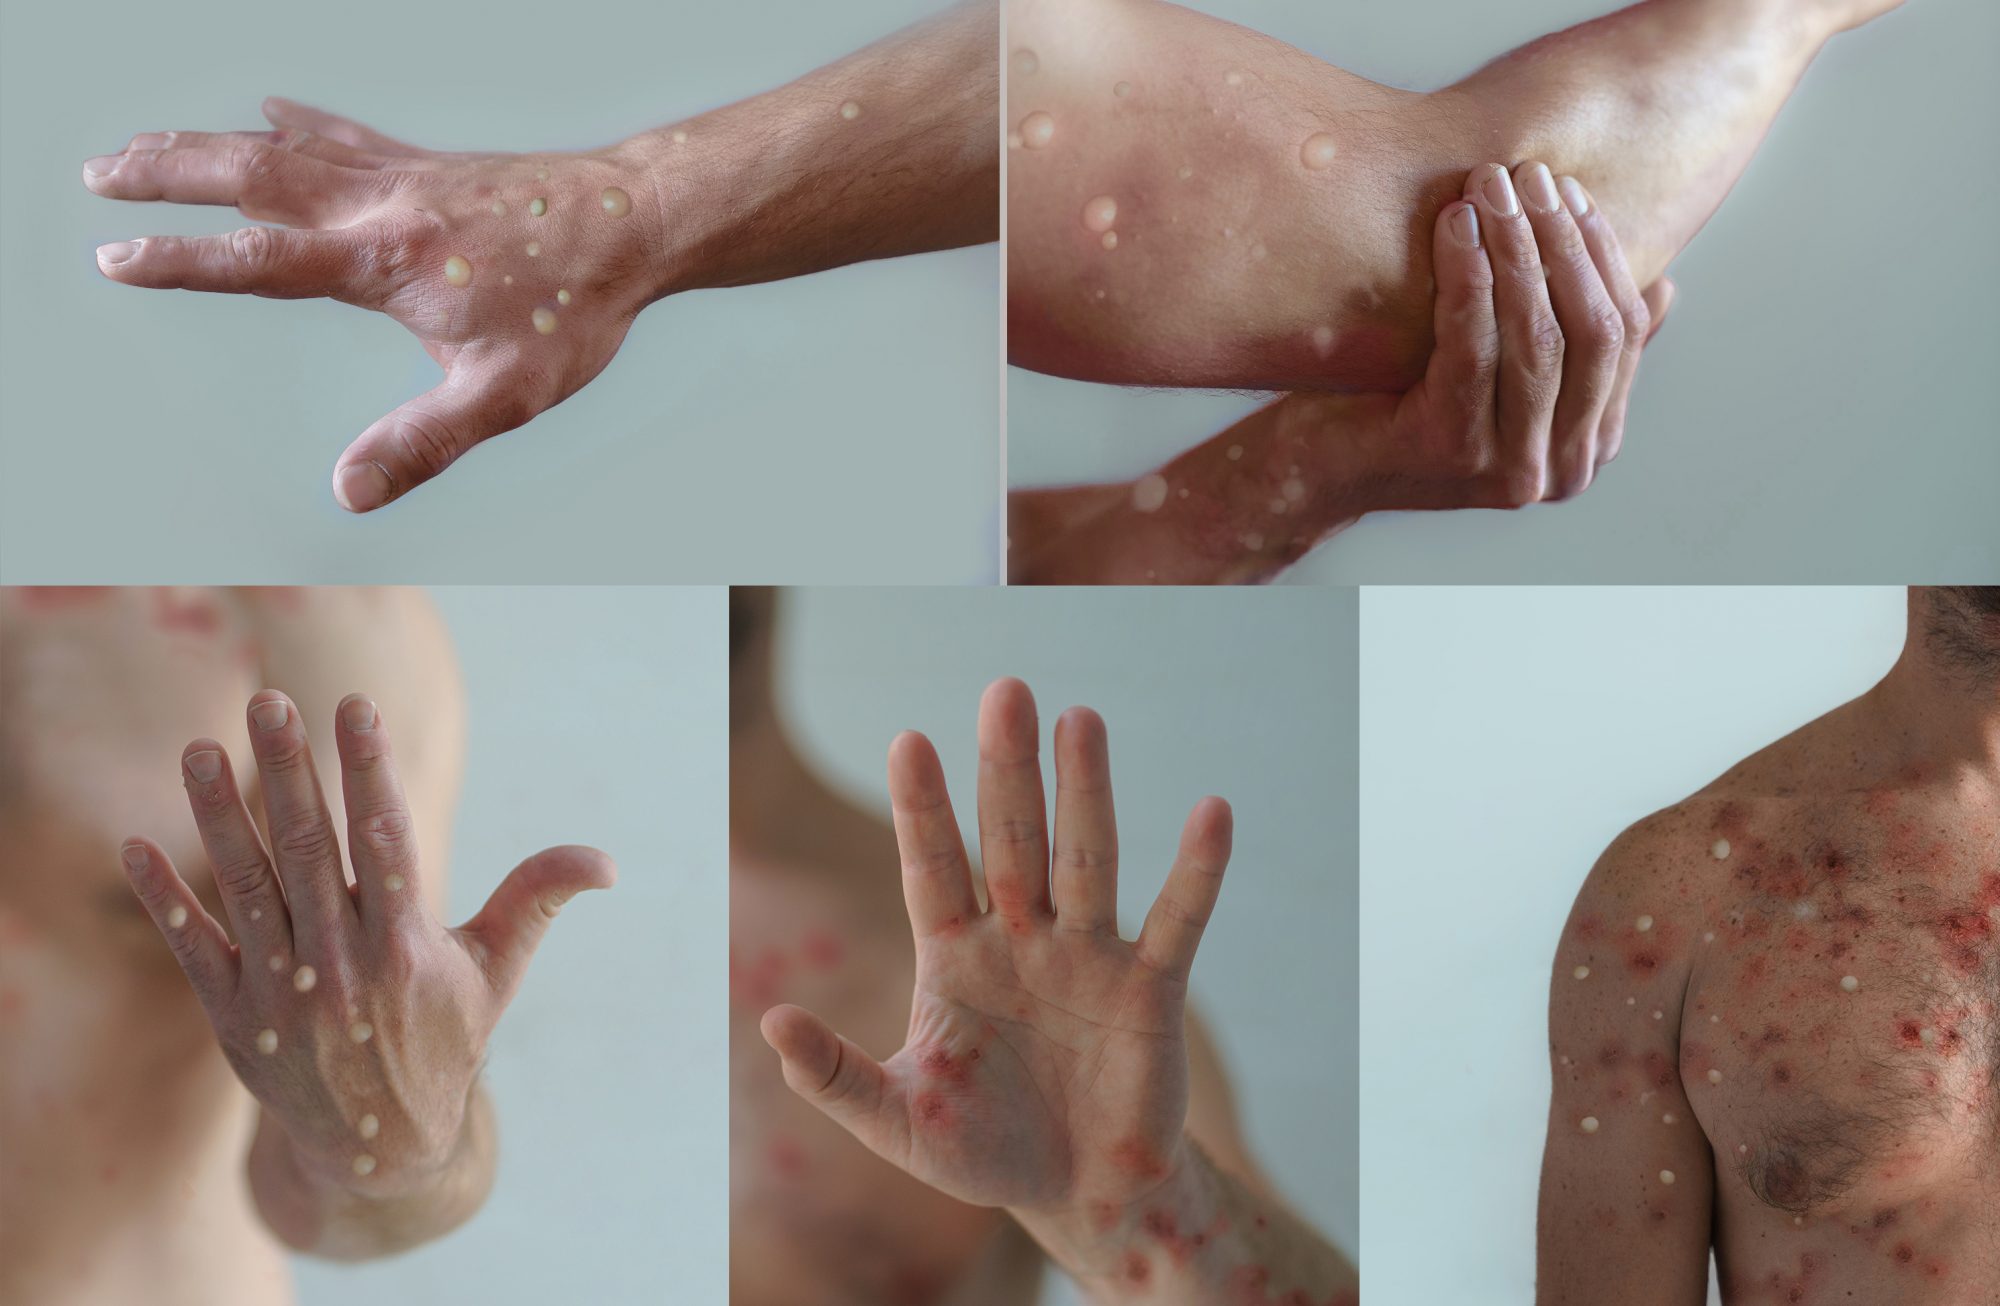 Male body parts affected by a blistering rash because of monkeypox or other viral infection